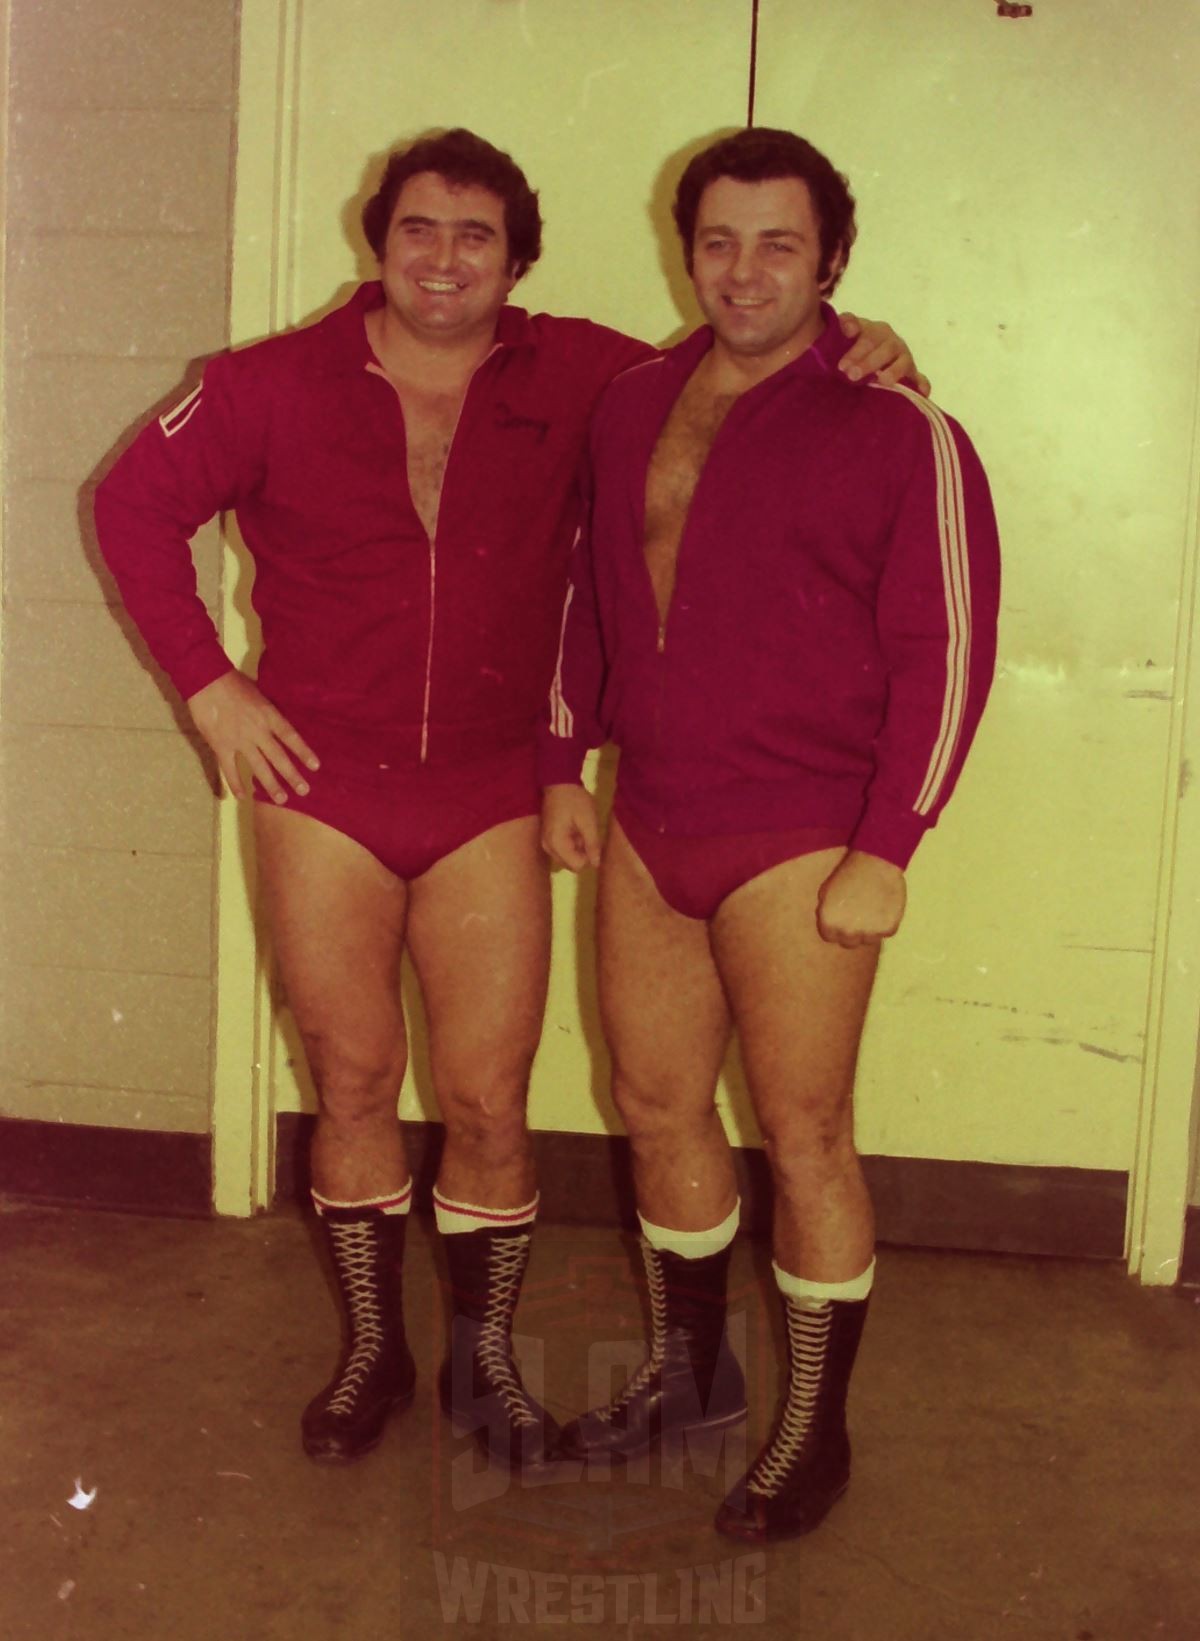 Tony Parisi and Gino Brito Sr. were known as Tony Pugliese and Louis Cerdan in the WWWF. Photo by John Arezzi